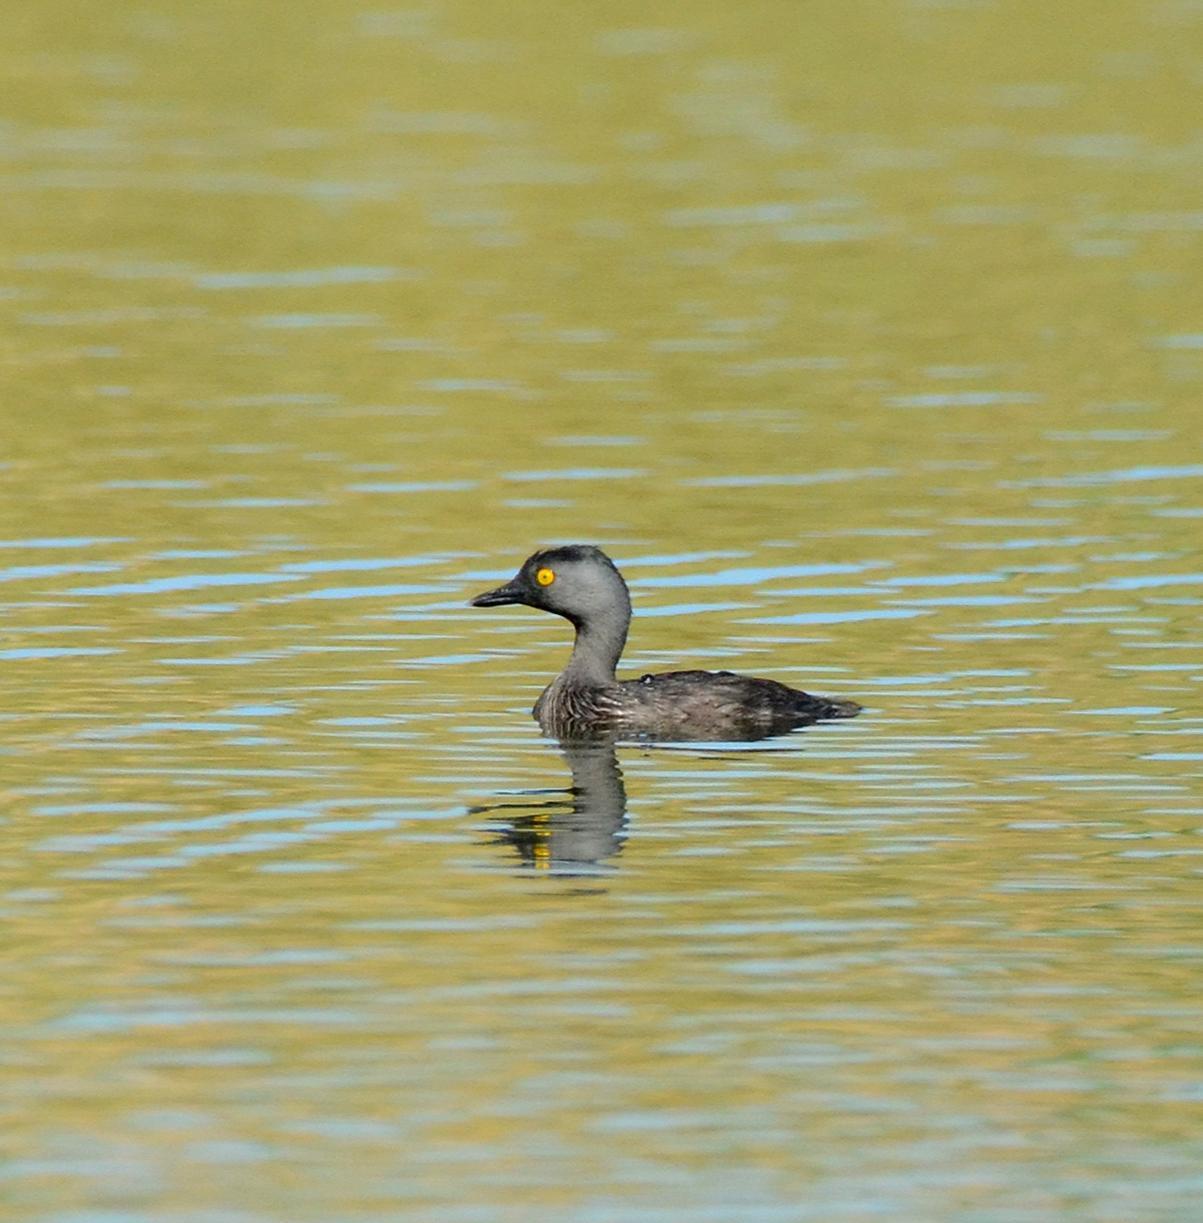 Least Grebe Photo by Steven Mlodinow